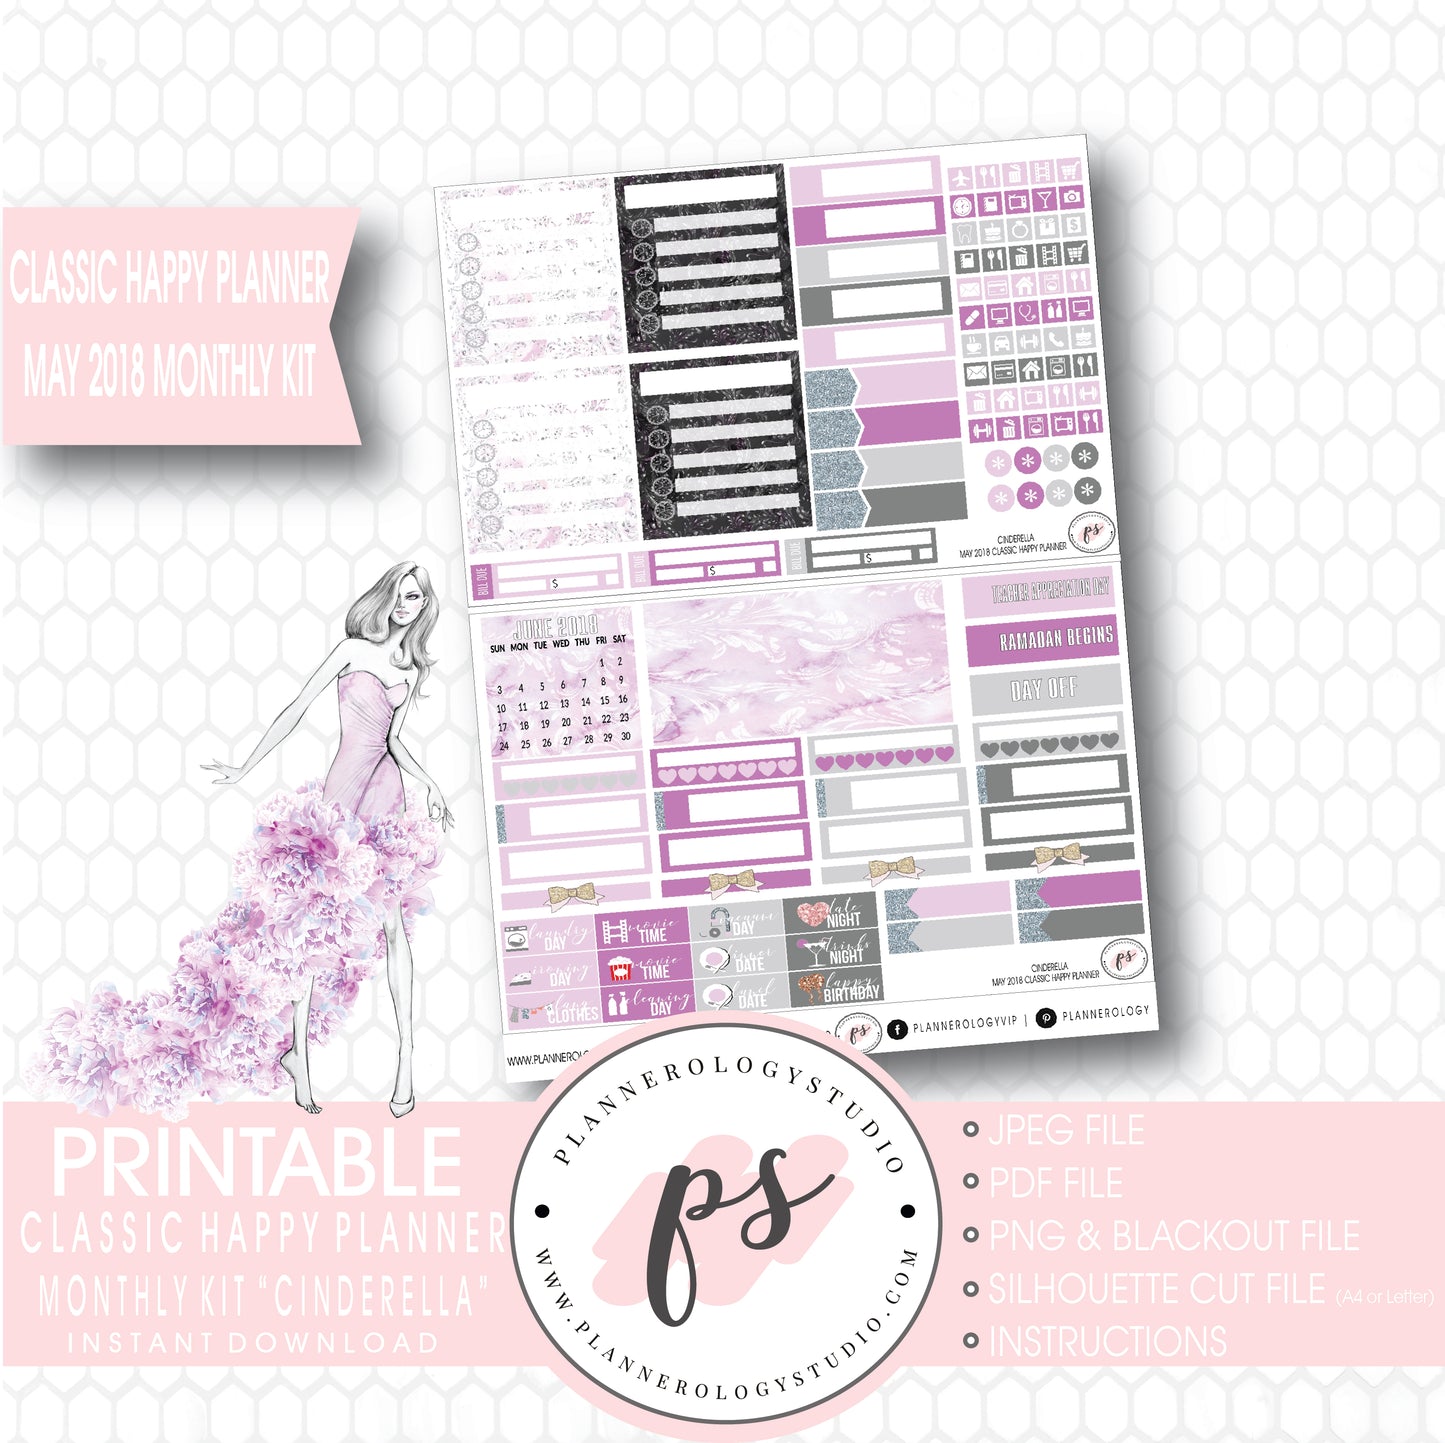 Cinderella May 2018 Monthly View Kit Digital Printable Planner Stickers (for use with Classic Happy Planner) - Plannerologystudio